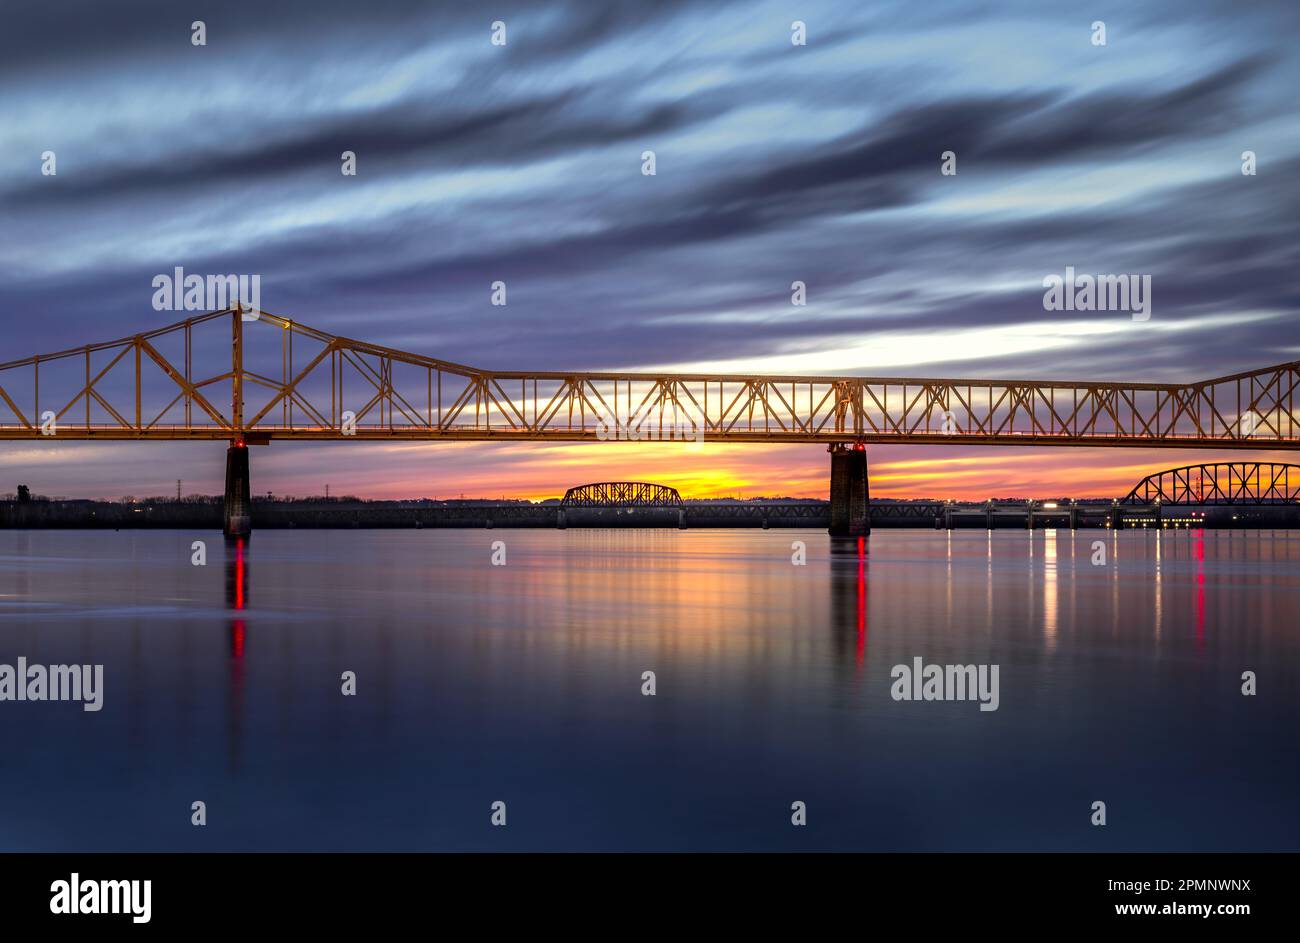 A stunning landscape featuring a bridge spanning over a tranquil body of water, illuminated by a beautiful sunrise, with clouds in the background Stock Photo